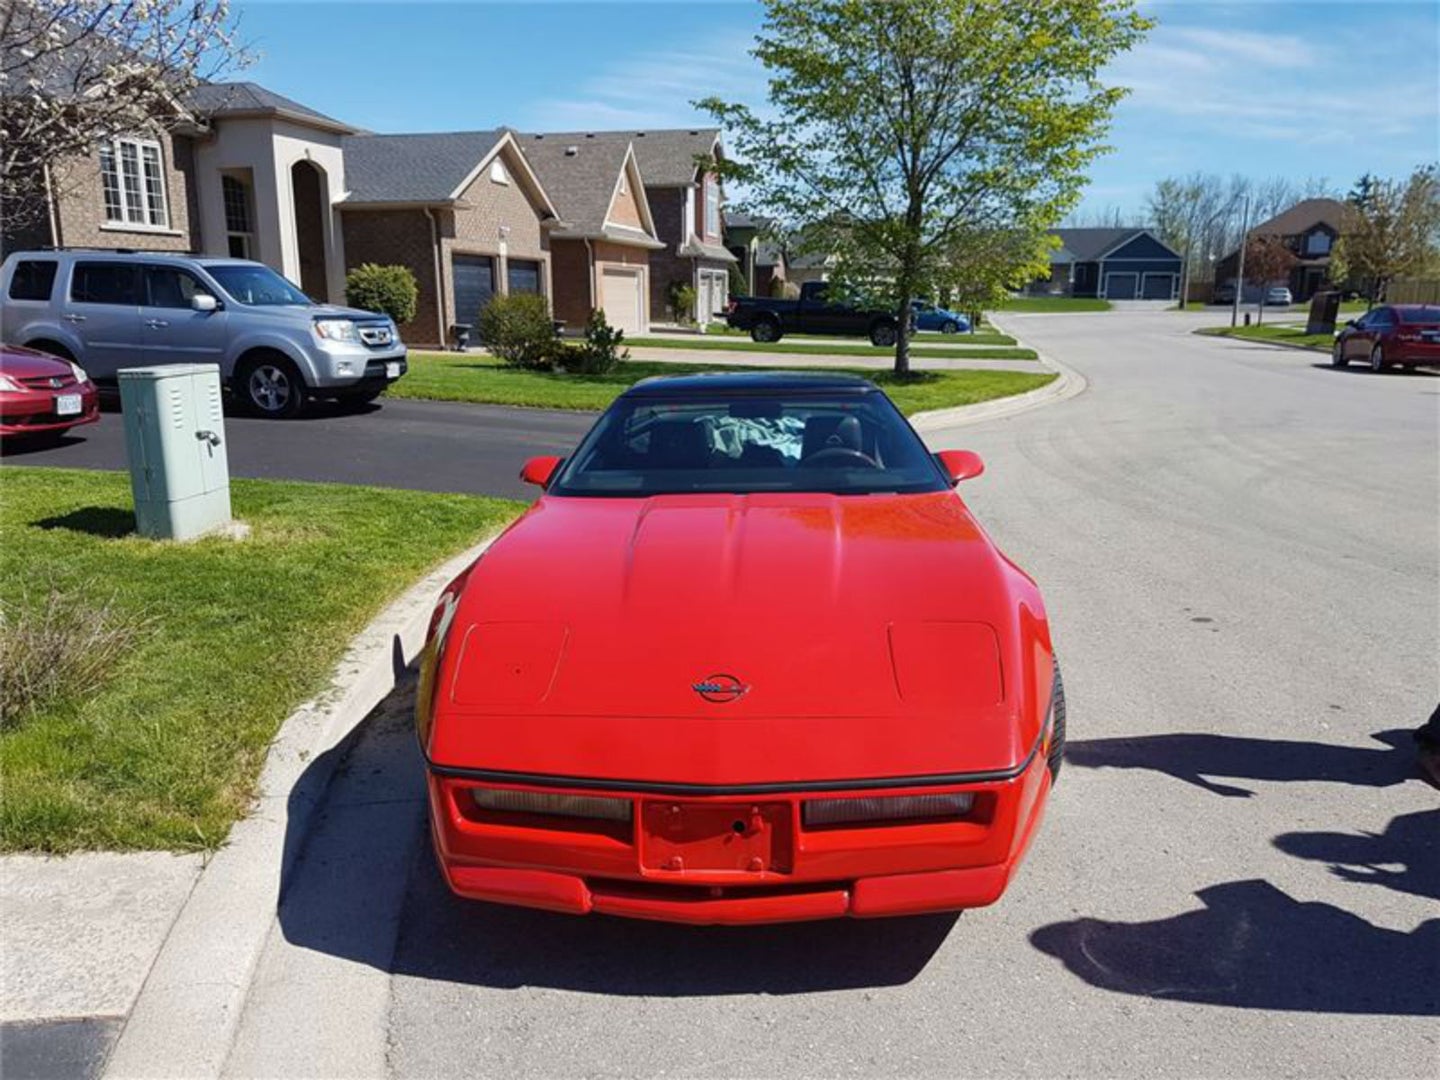 This 100,000-Mile 1985 Chevy Corvette Is Listed for $1 Million